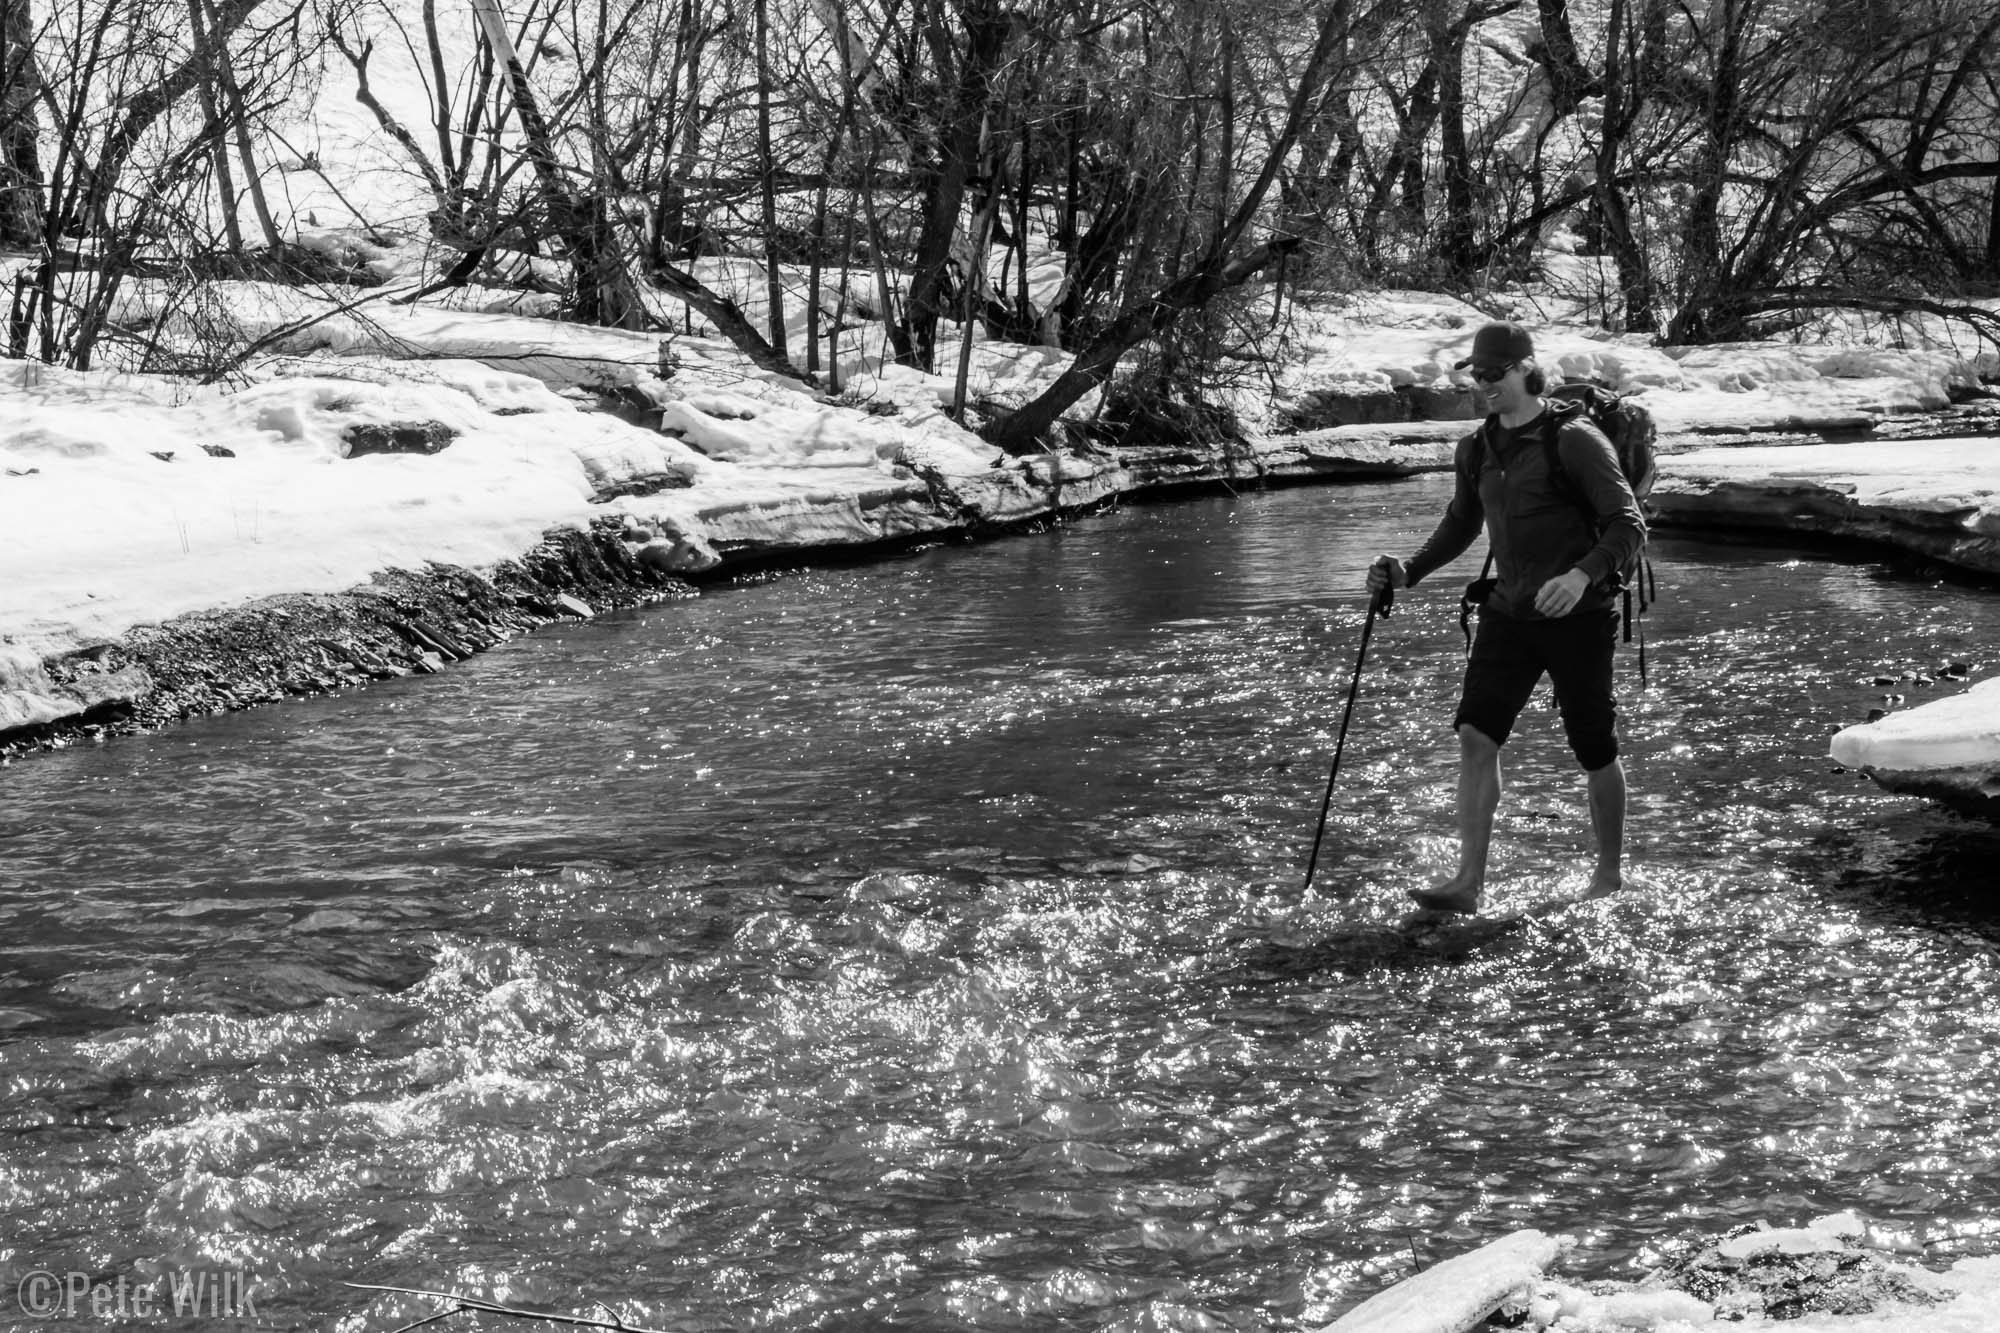 Fording the Strawberry river at a shallow spot.